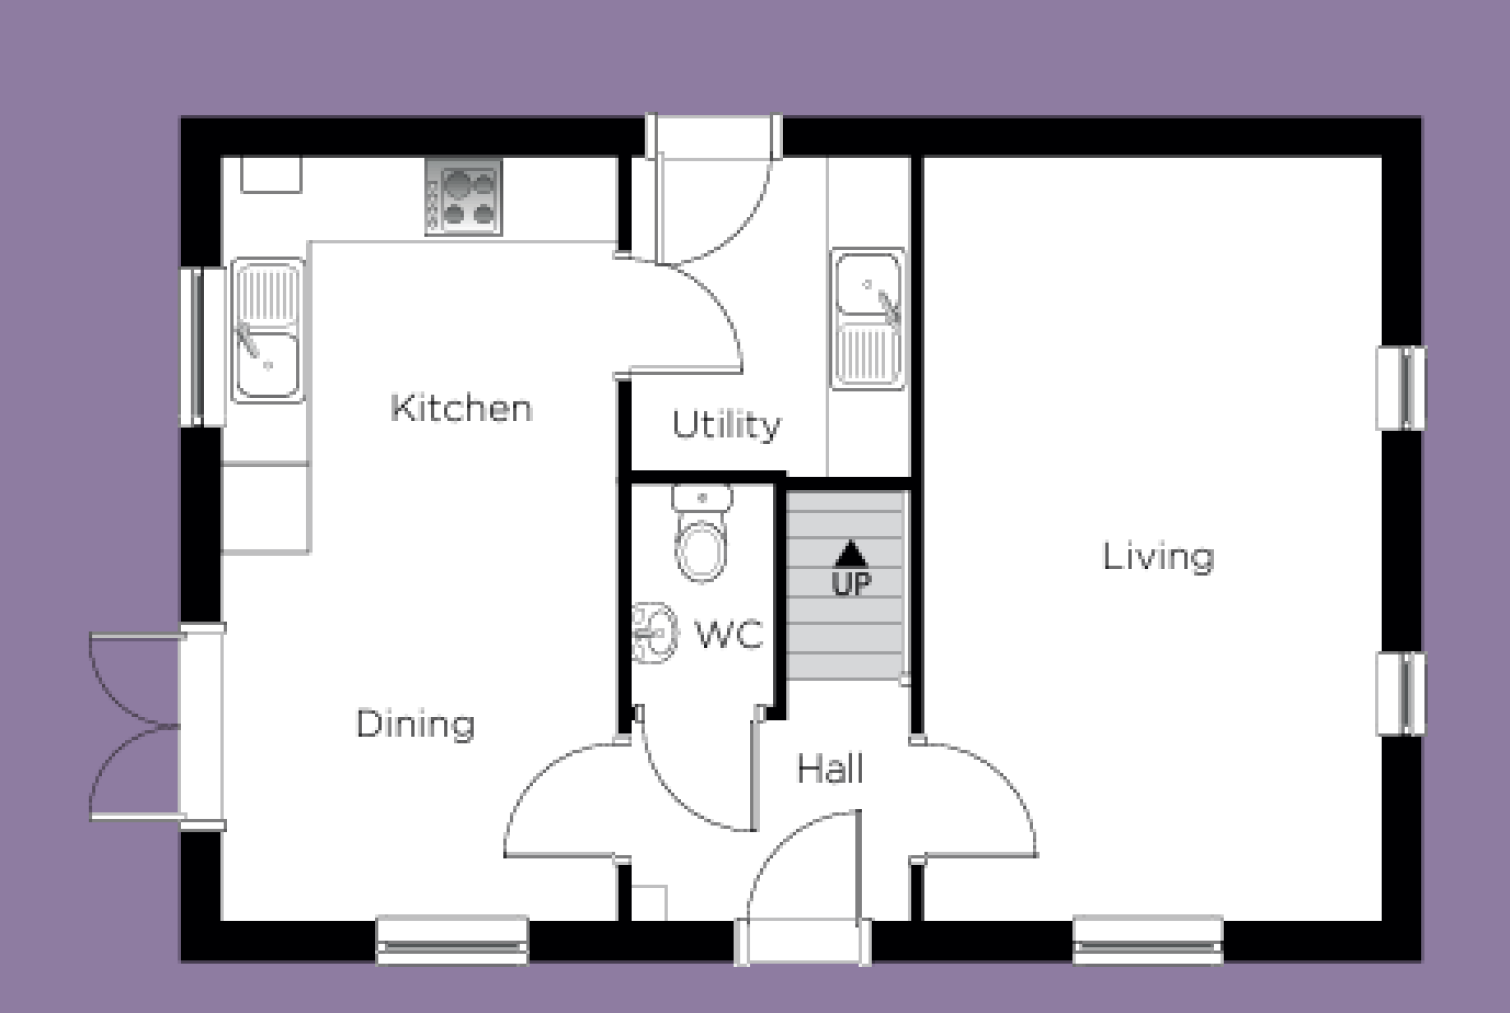 Ground Floor Plan for The Becket.